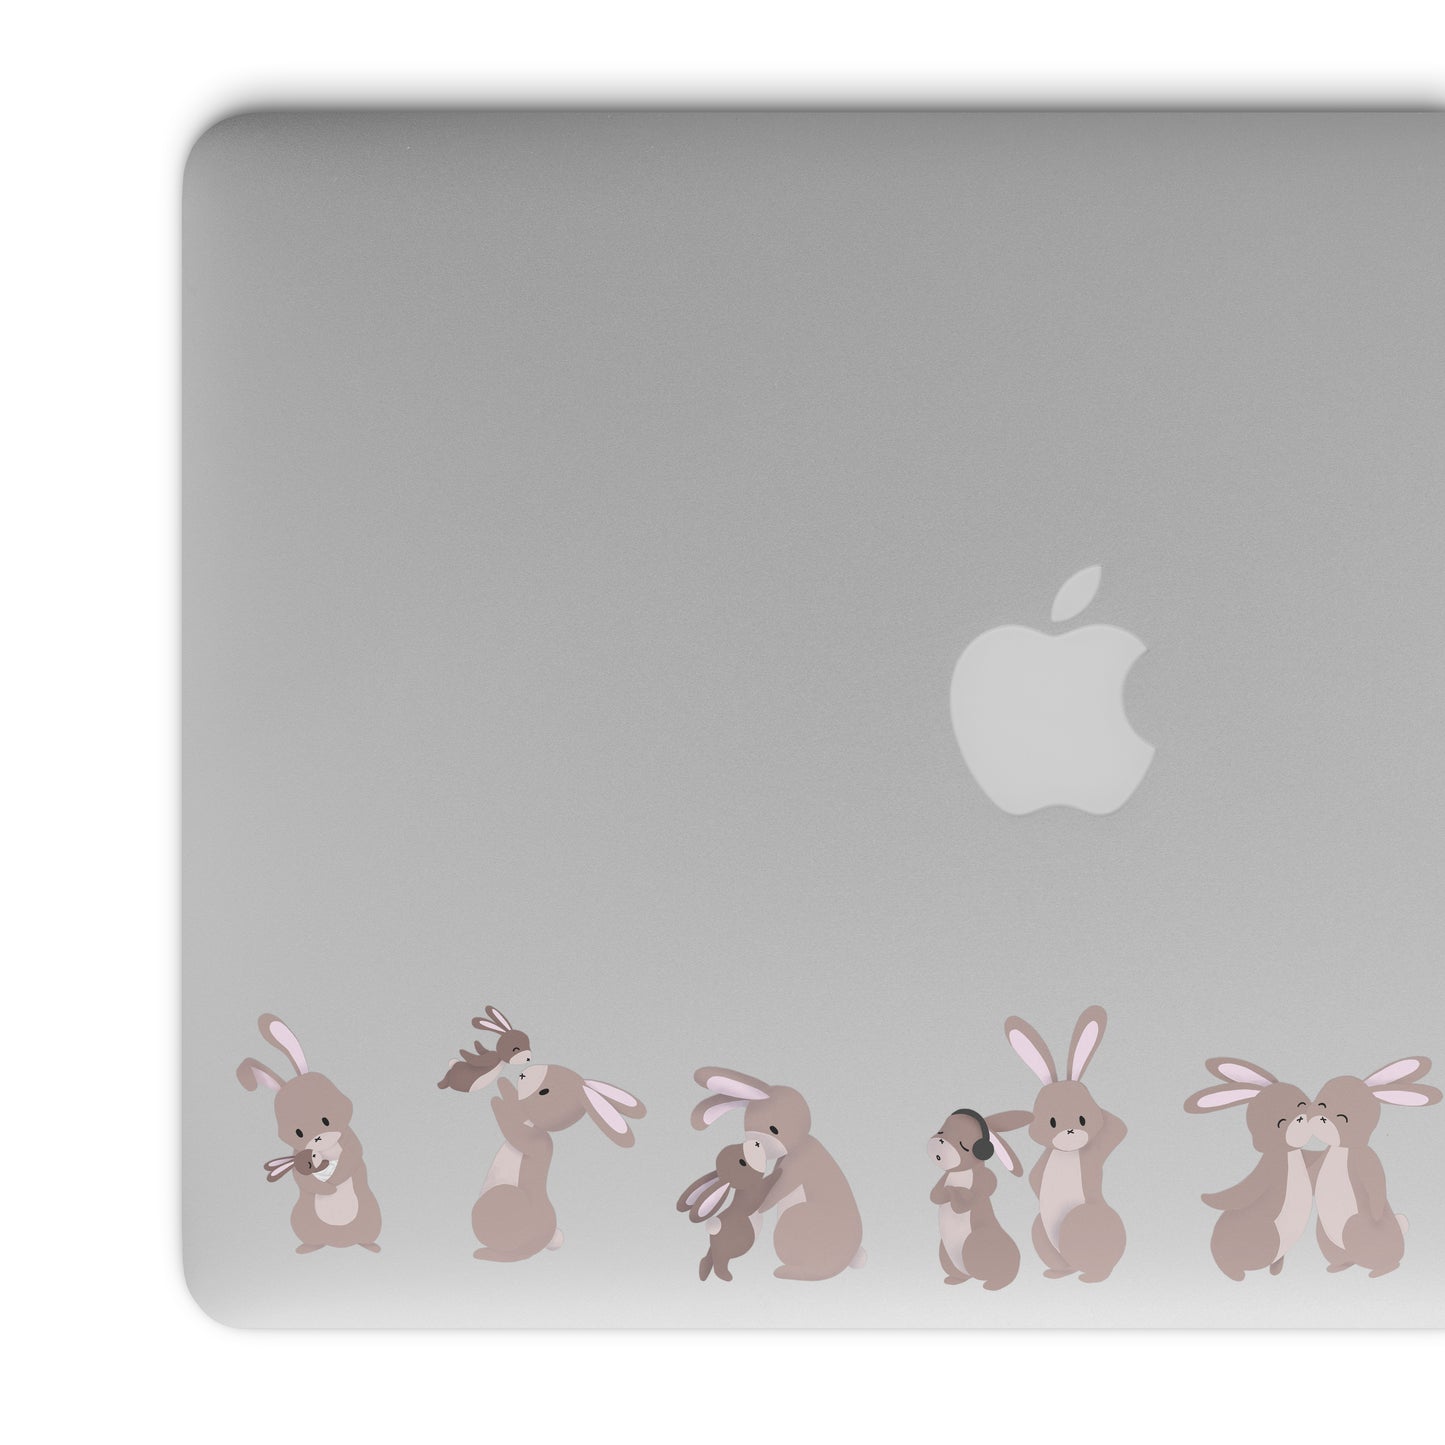 A Mother's Love Bunnies, Mother & Baby Sticker (#5 of 5)